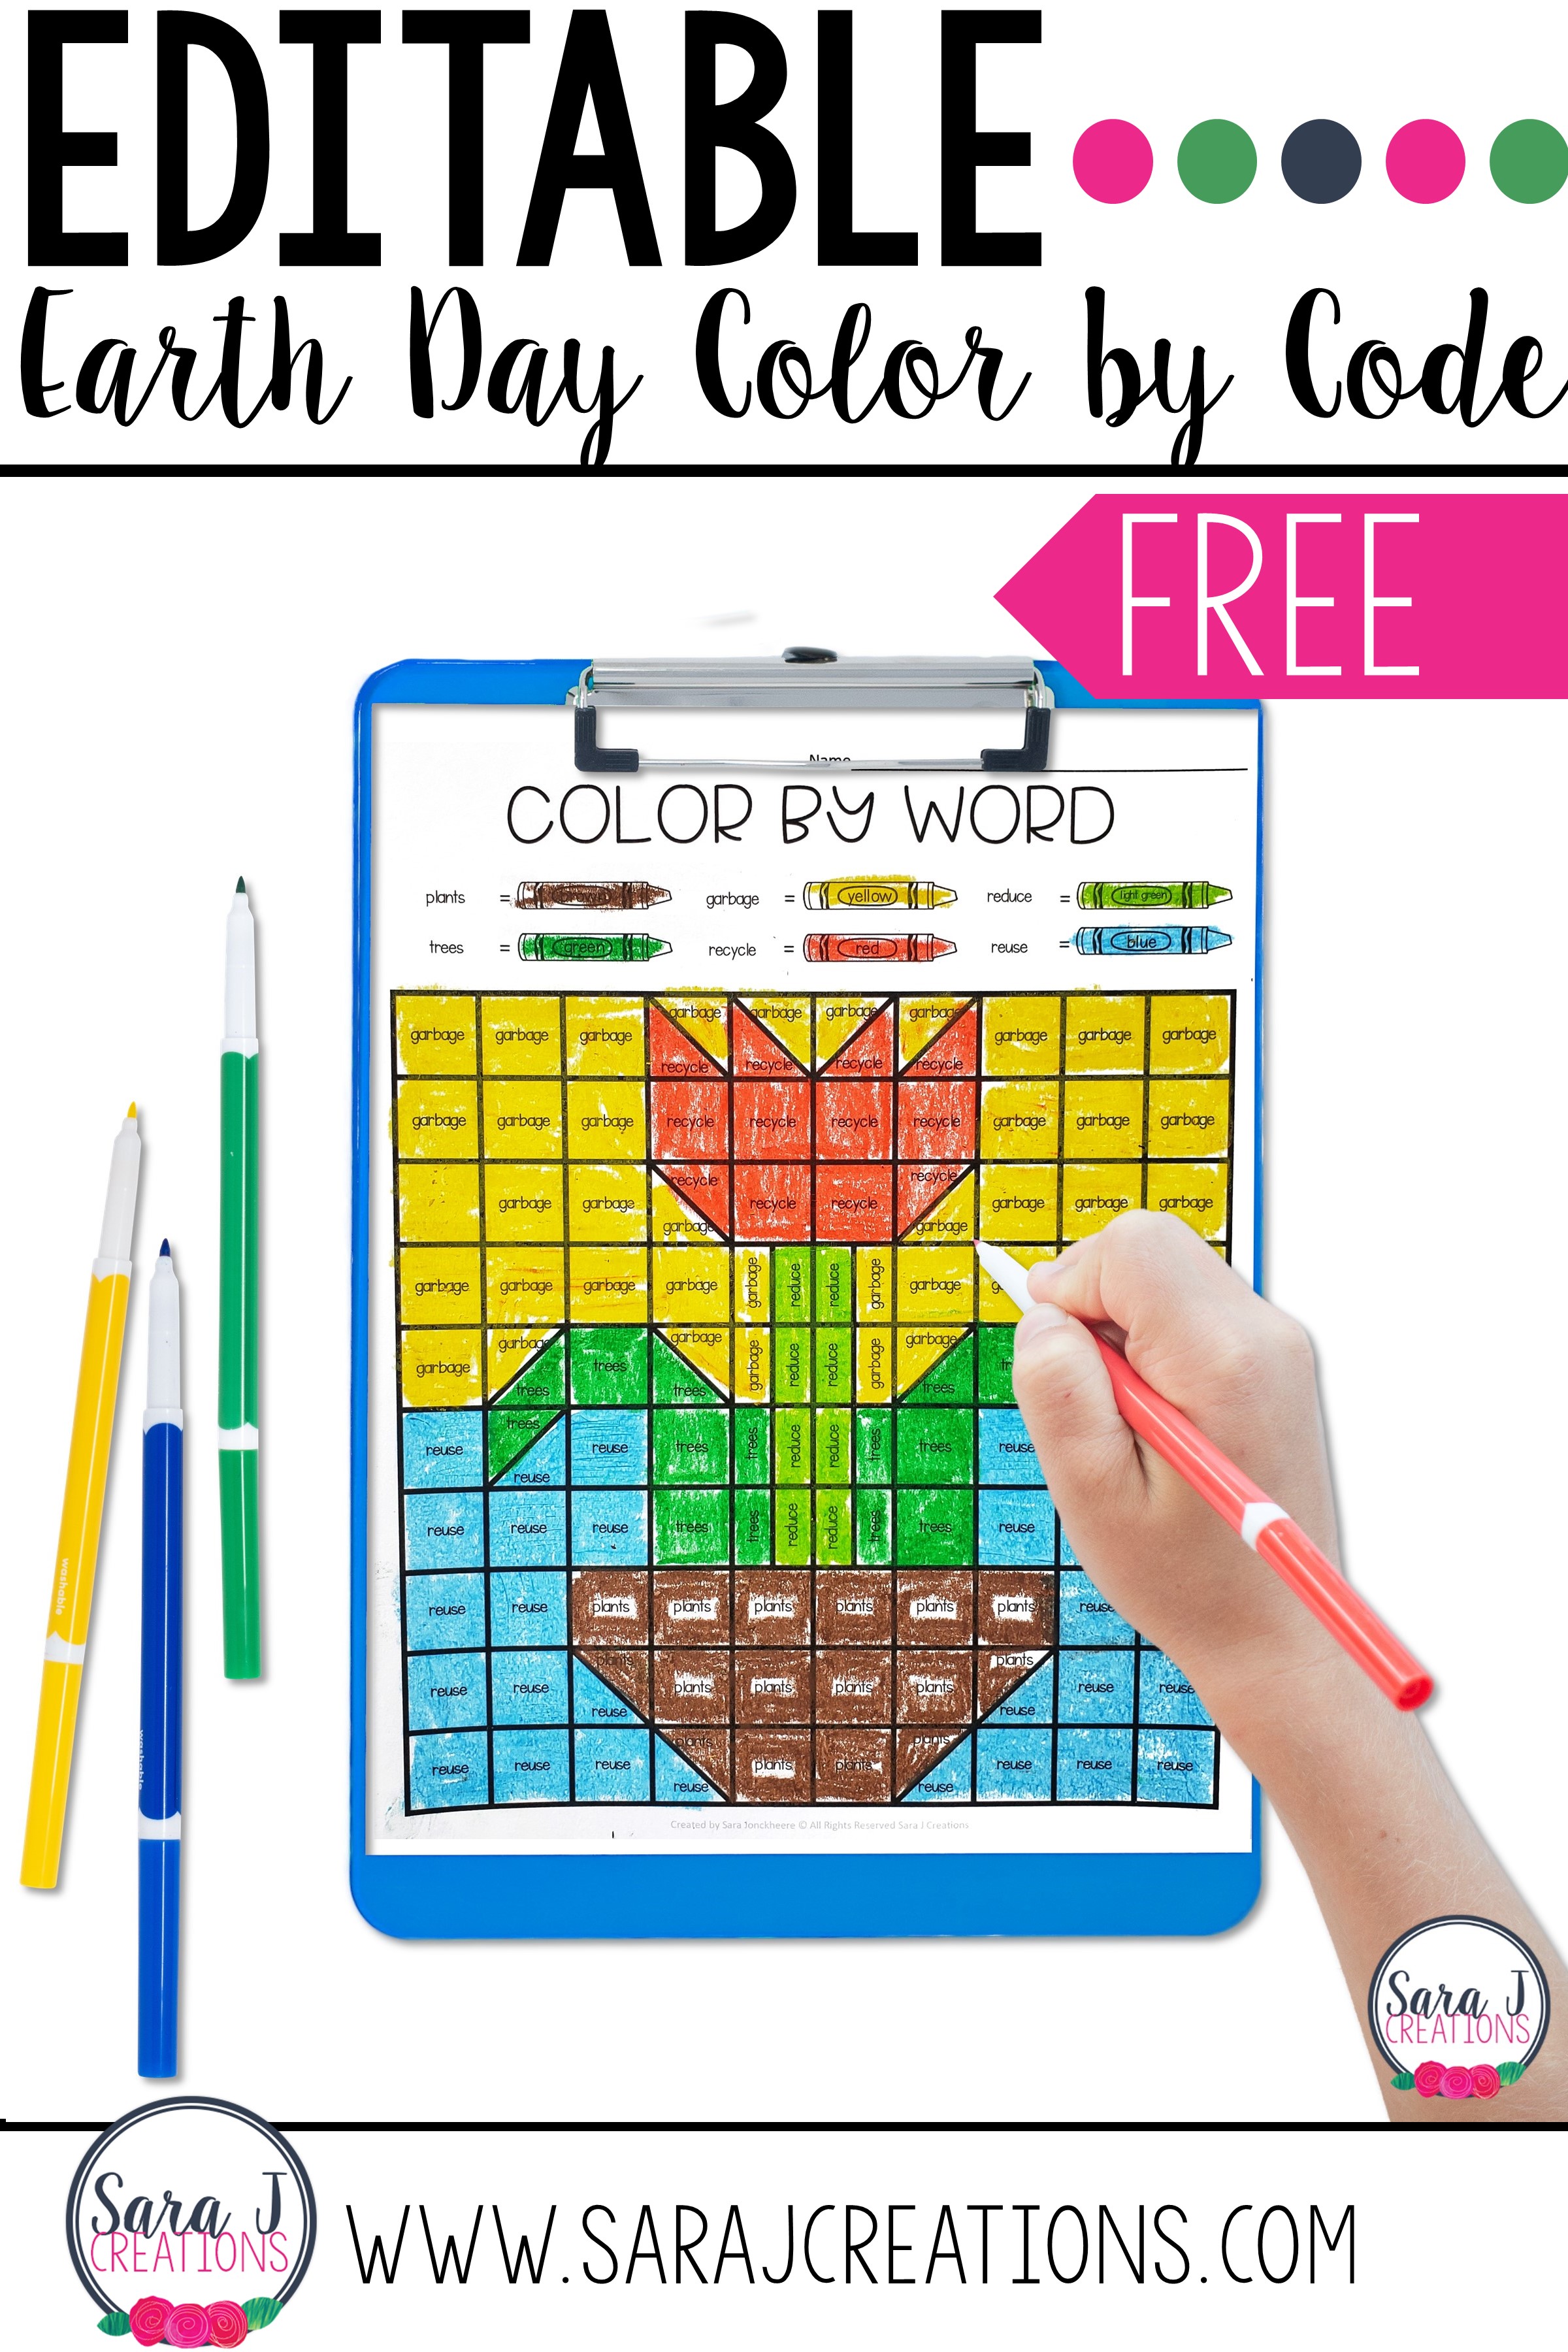 Free color by sight word pages for Earth Day that are editable. Type in any word you want and the pictures are automatically created!